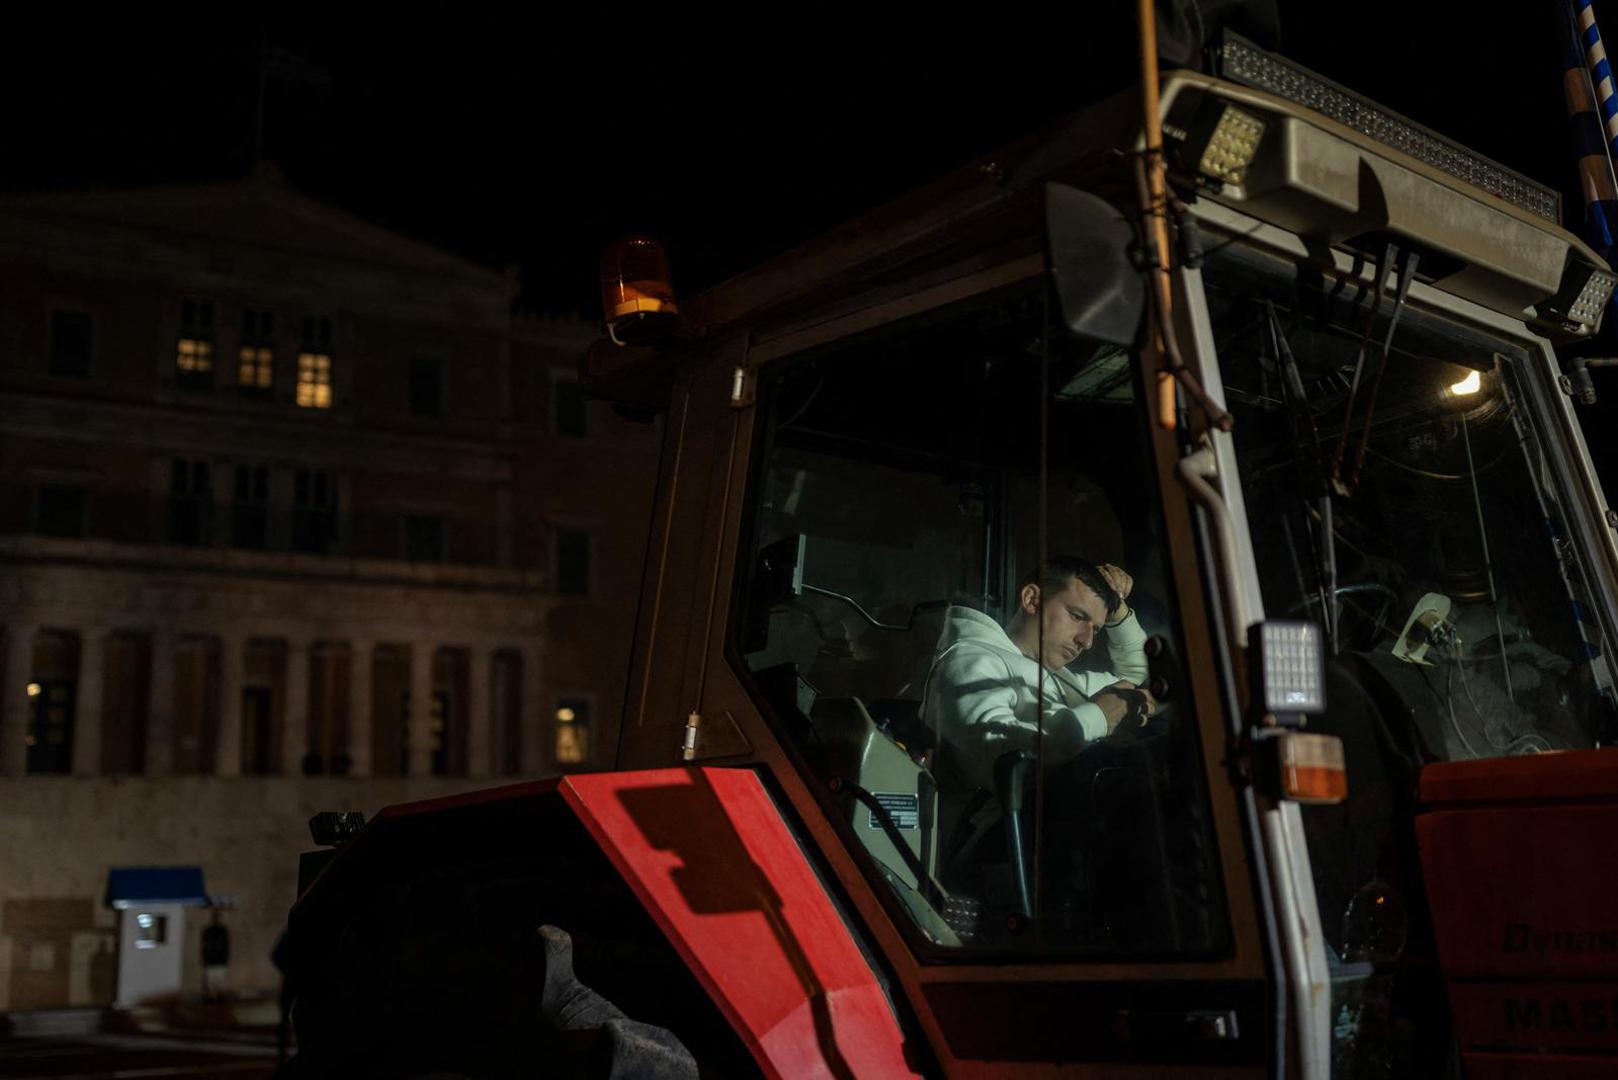 A Greek farmer on a tractor takes part in a protest over rising energy costs and competition from imports, in front of the parliament building in Athens, Greece, February 20, 2024. REUTERS/Alkis Konstantinidis Photo: Alkis Konstantinidis/REUTERS